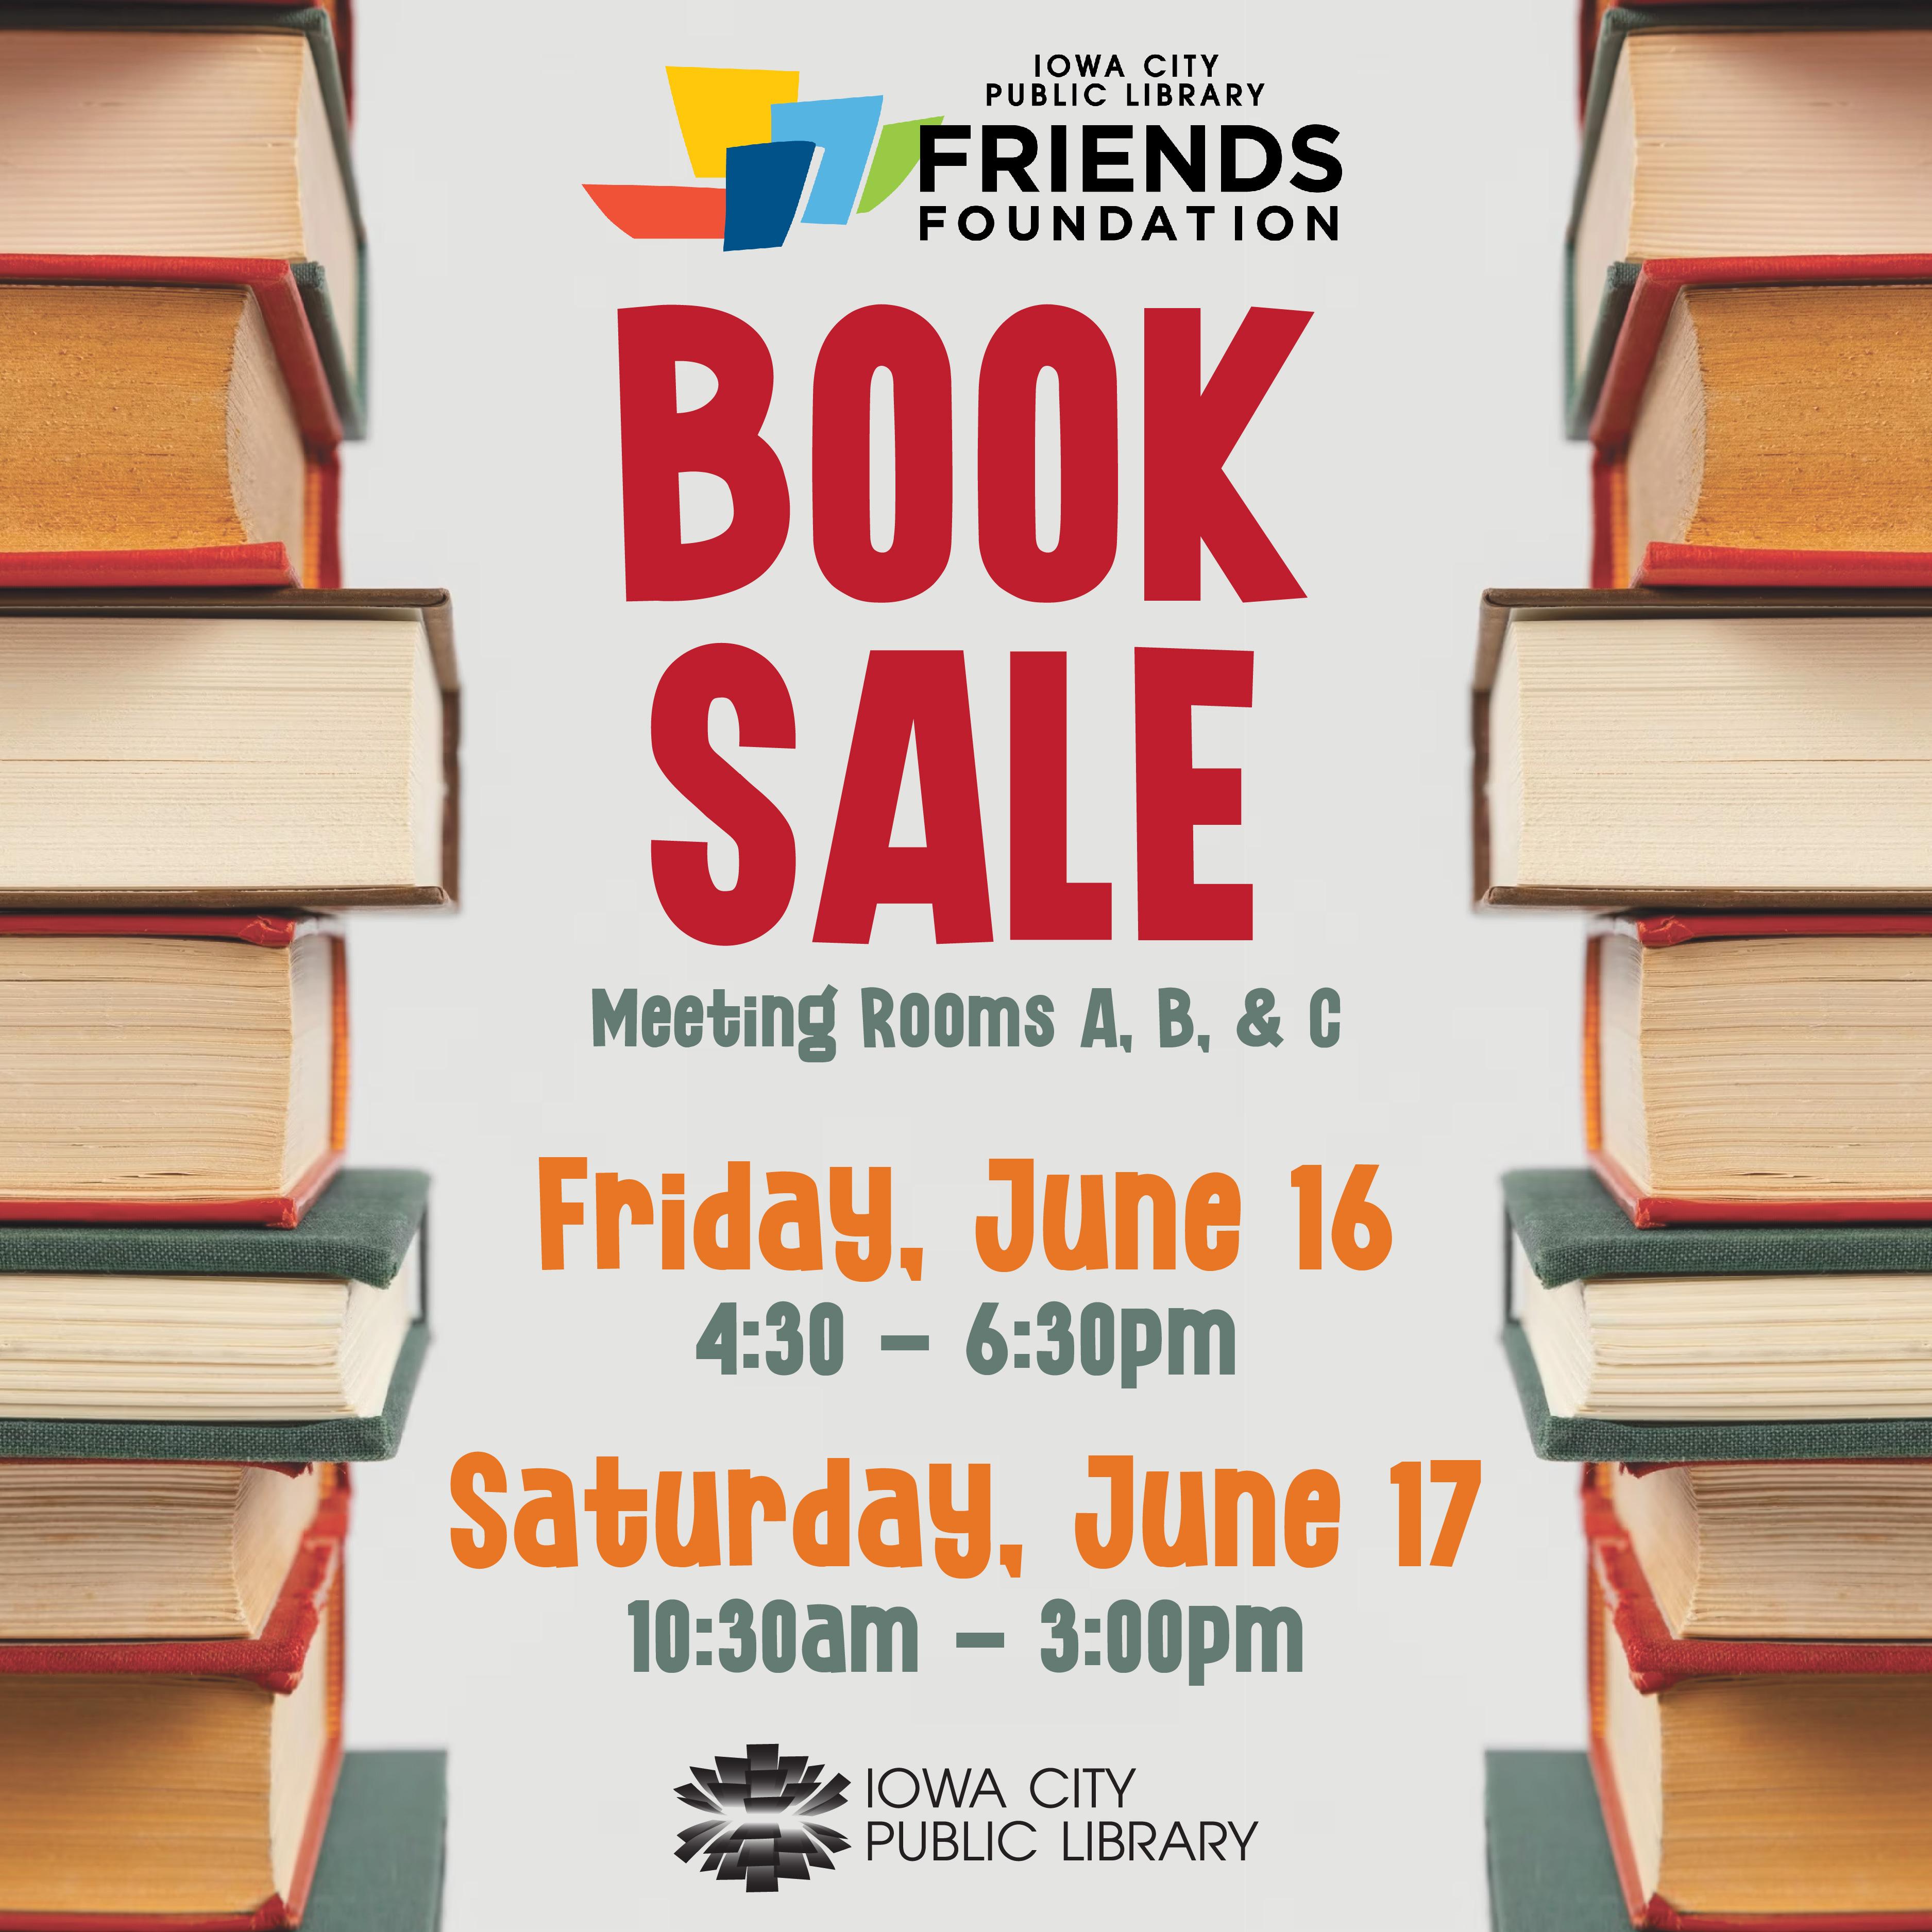 Iowa City Public Library Friends Foundation Book Sale - Meeting Rooms A, B, and C. Friday, June 16 from 4:30-6:30pm and Saturday, June 17 from 10:30am to 3:00pm